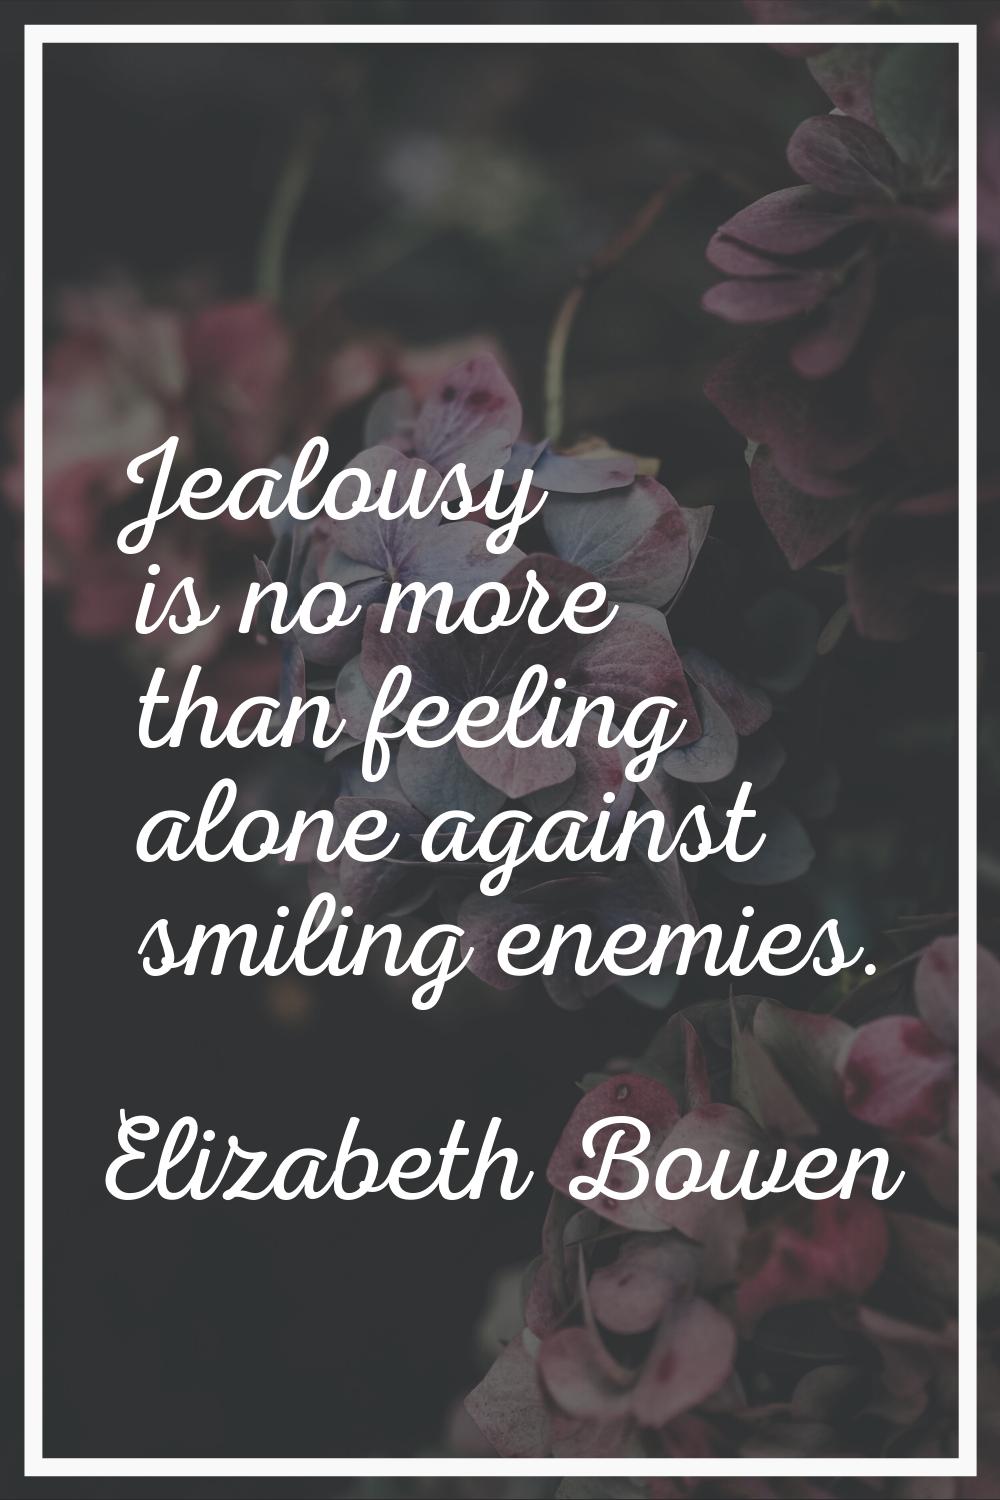 Jealousy is no more than feeling alone against smiling enemies.